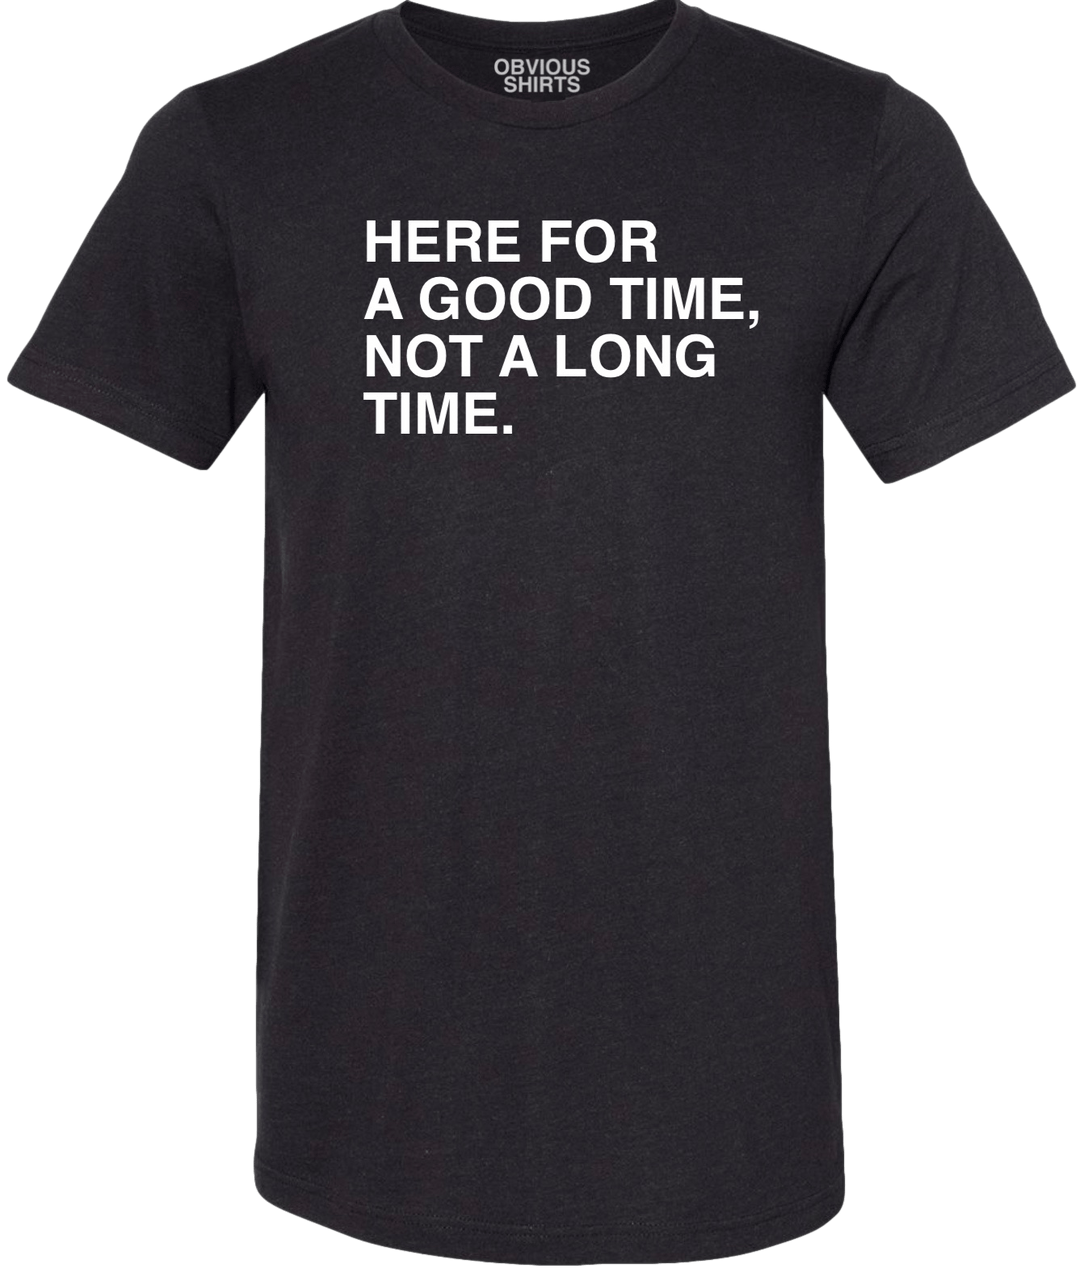 HERE FOR A GOOD TIME, NOT A LONG TIME. - OBVIOUS SHIRTS.